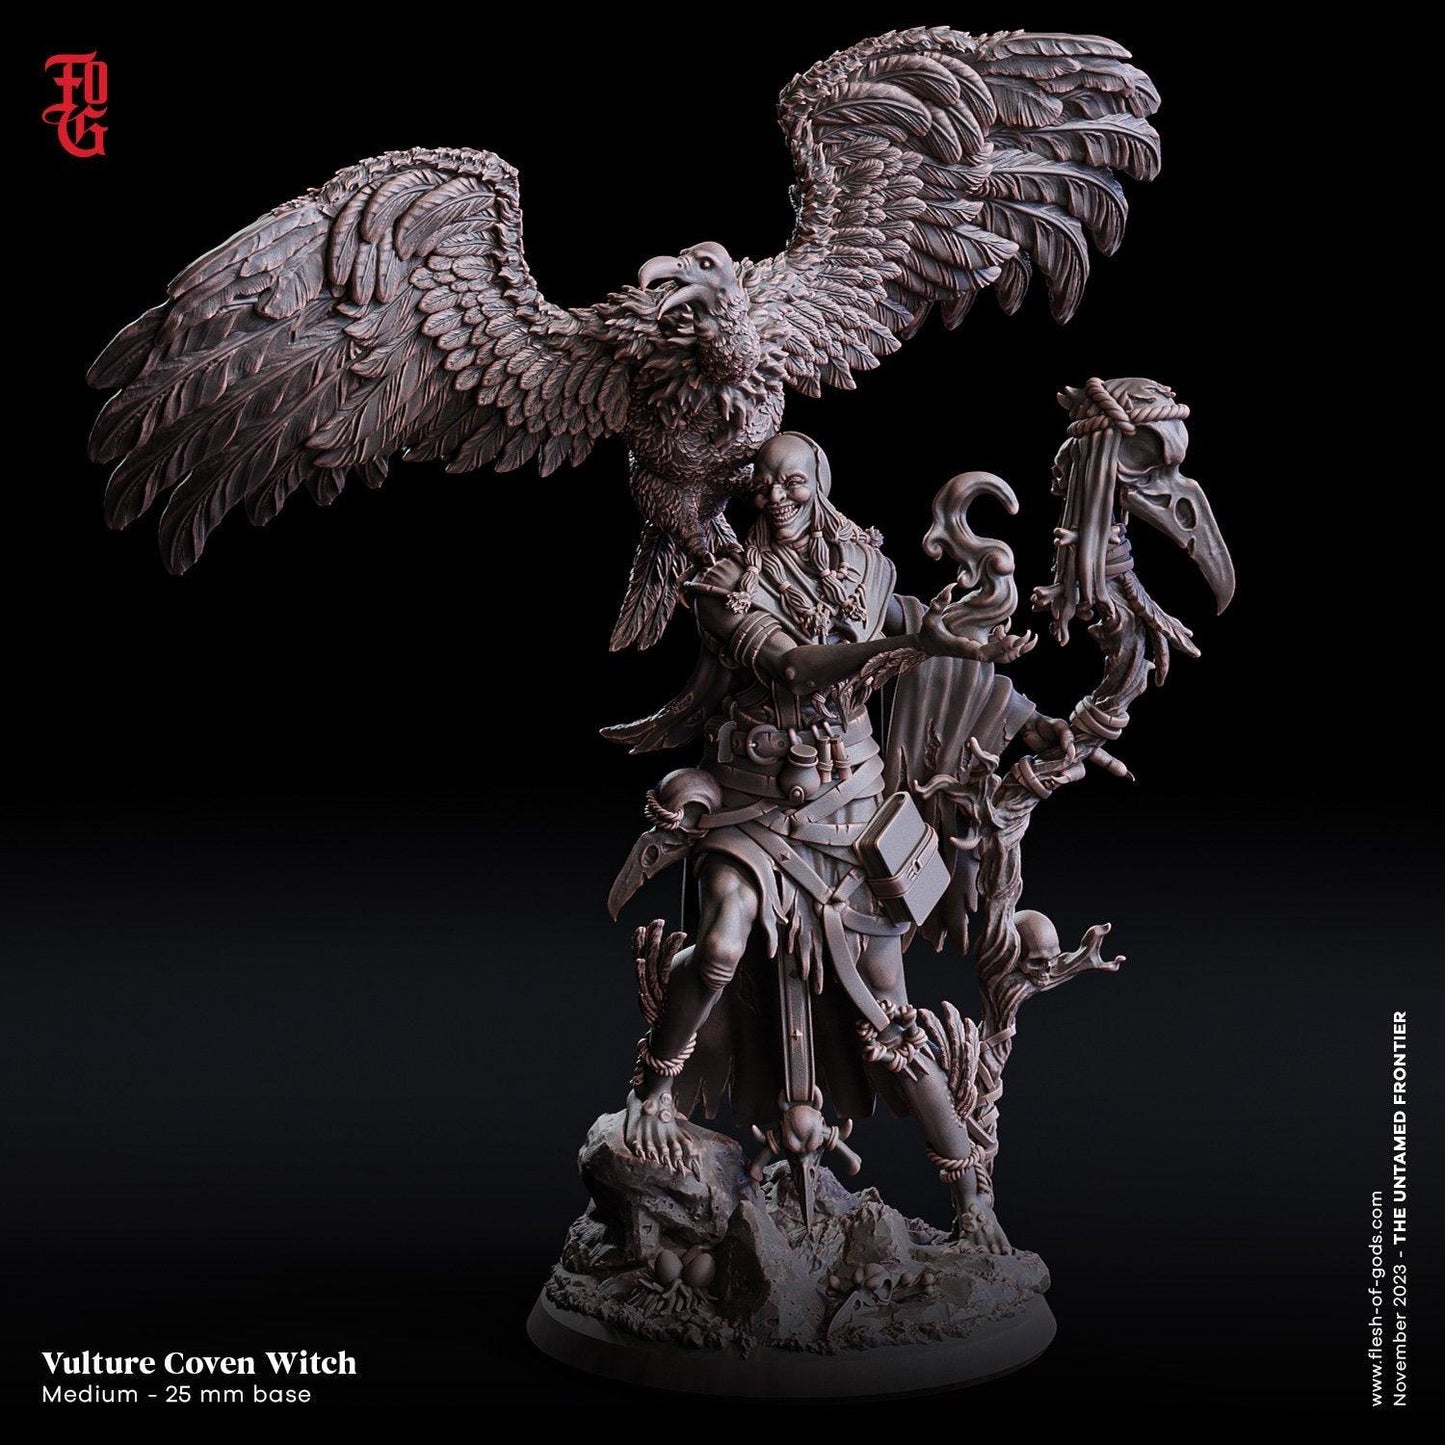 Mounted Vulture Coven Witch Miniature | Bewitching Addition for Wild West Campaigns | 50mm Base - Plague Miniatures shop for DnD Miniatures